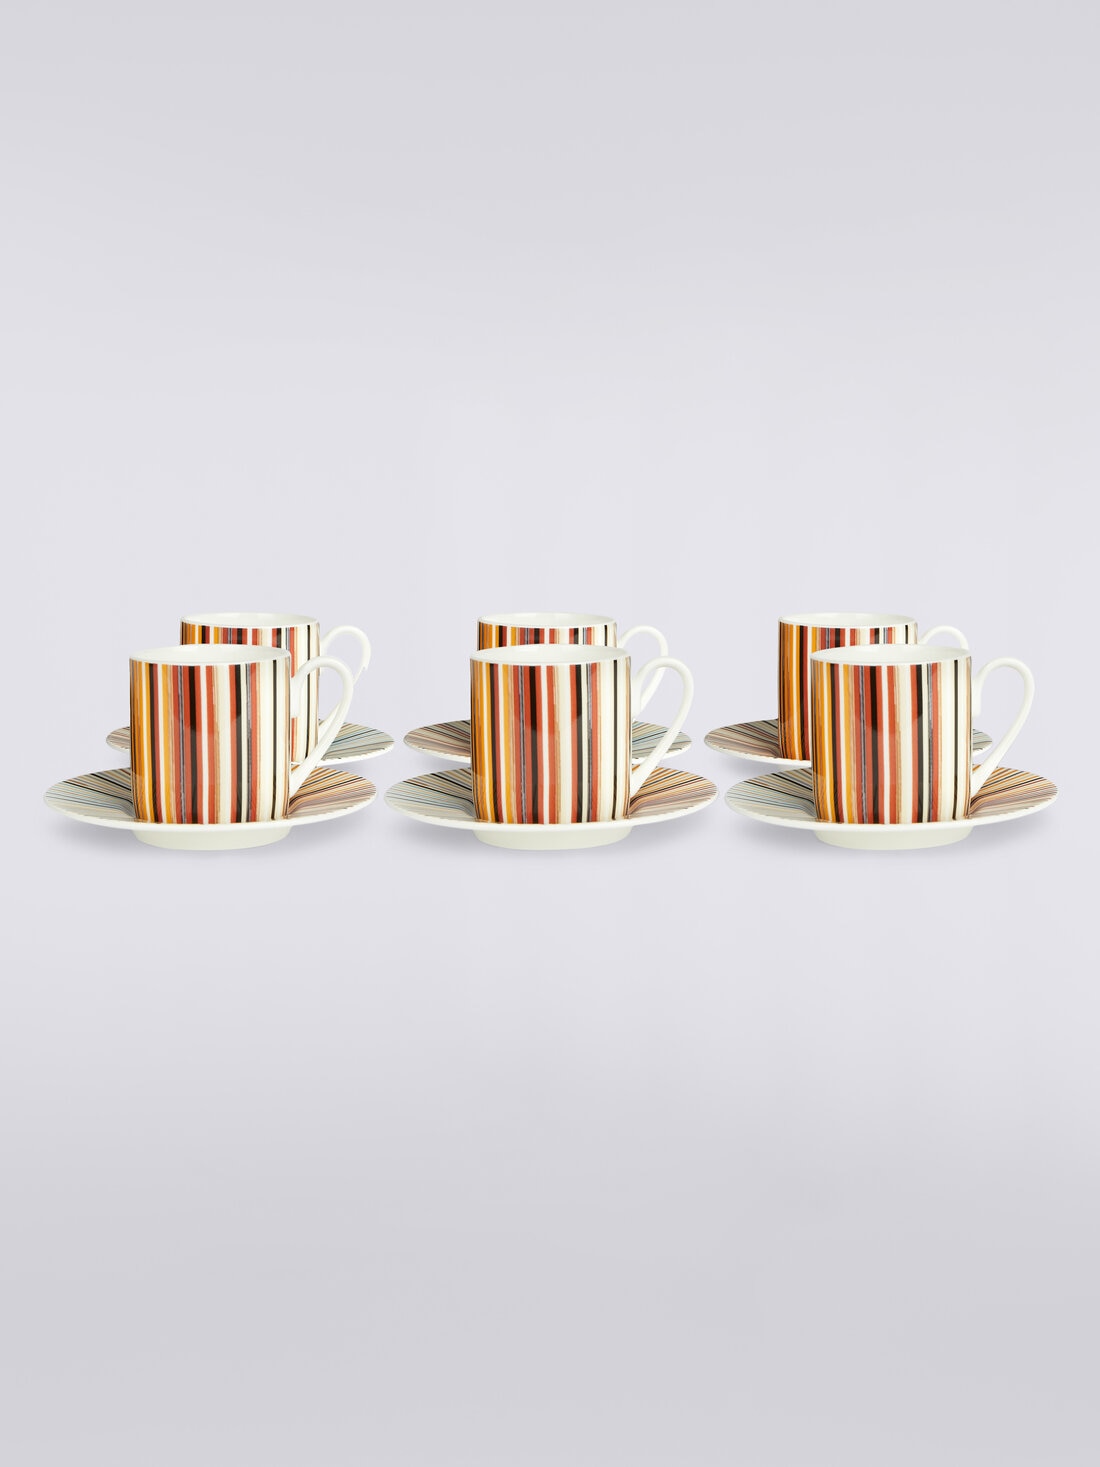 Jenkins Set of 6 coffee cups & saucers, White  - 8051575779015 - 3